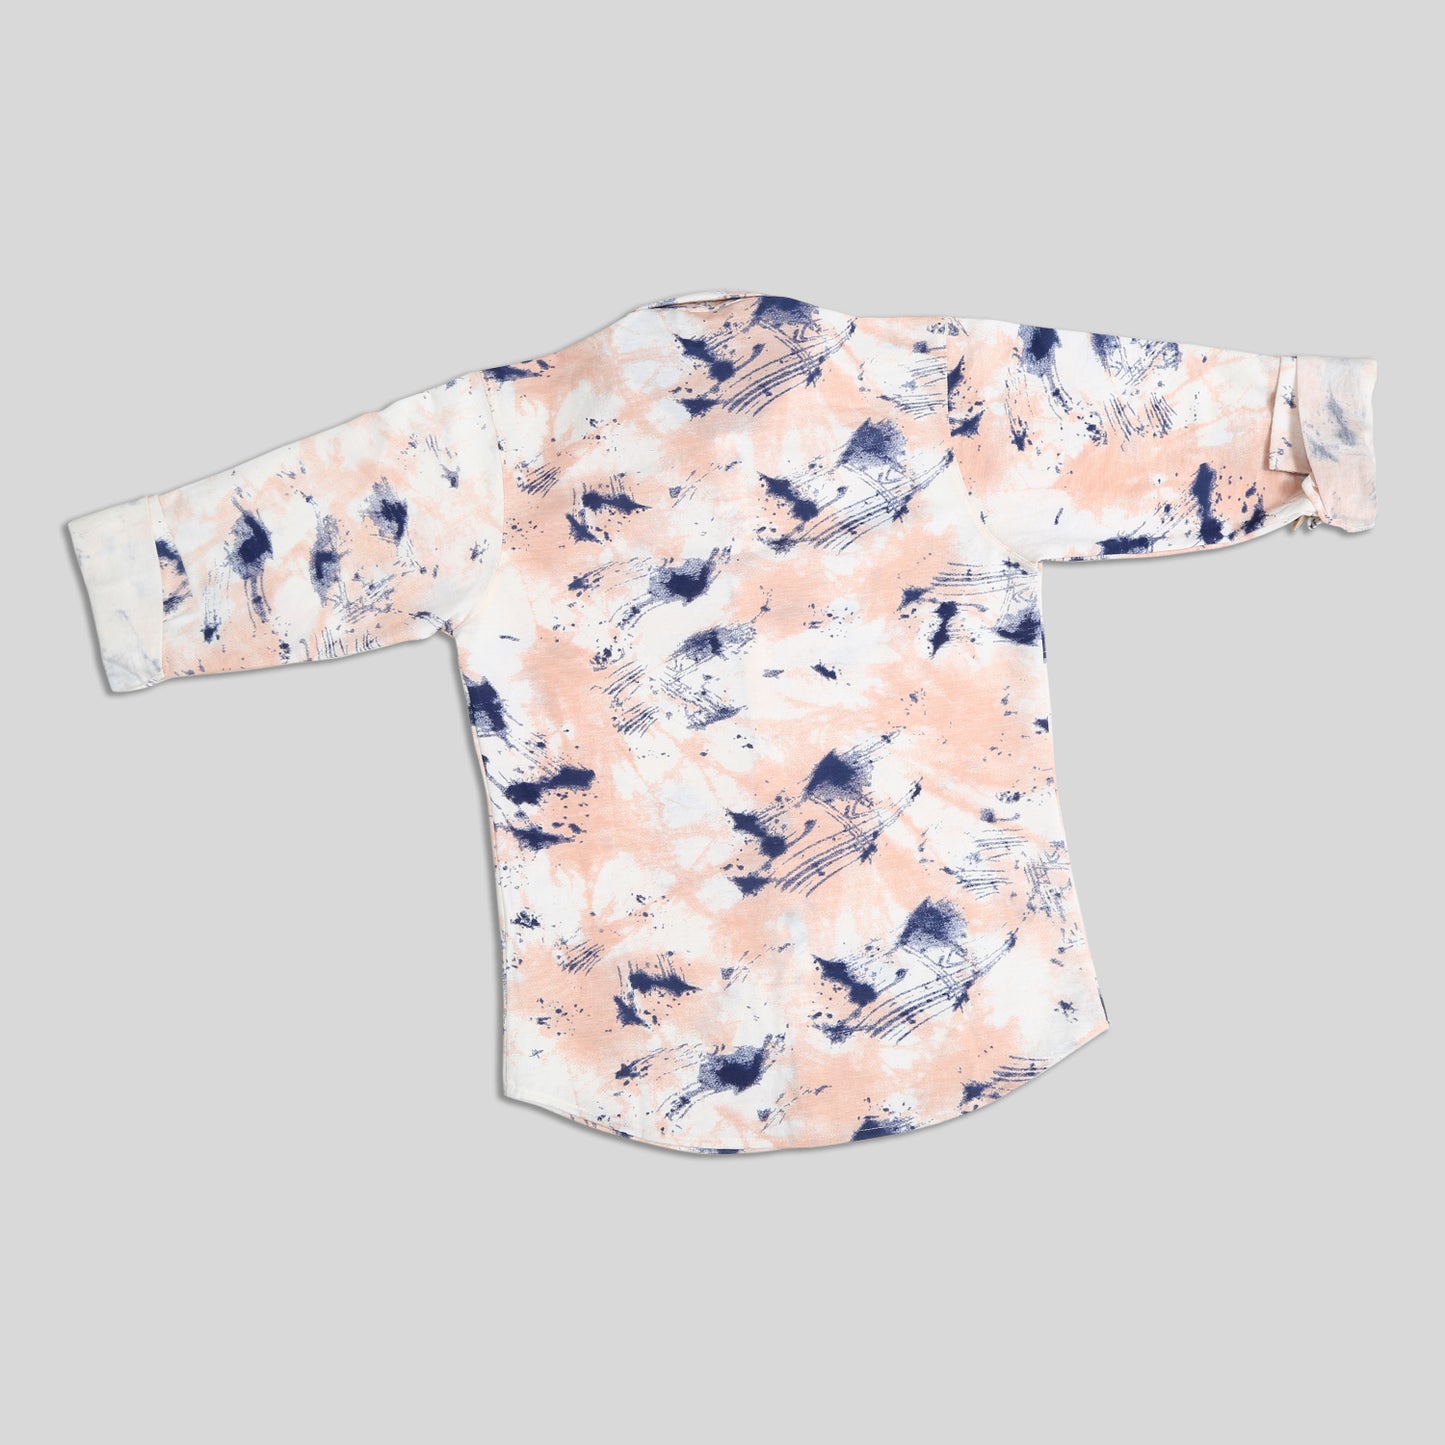 Printed Perfection: Elevate Your Casual Style with This Unique Shirt!